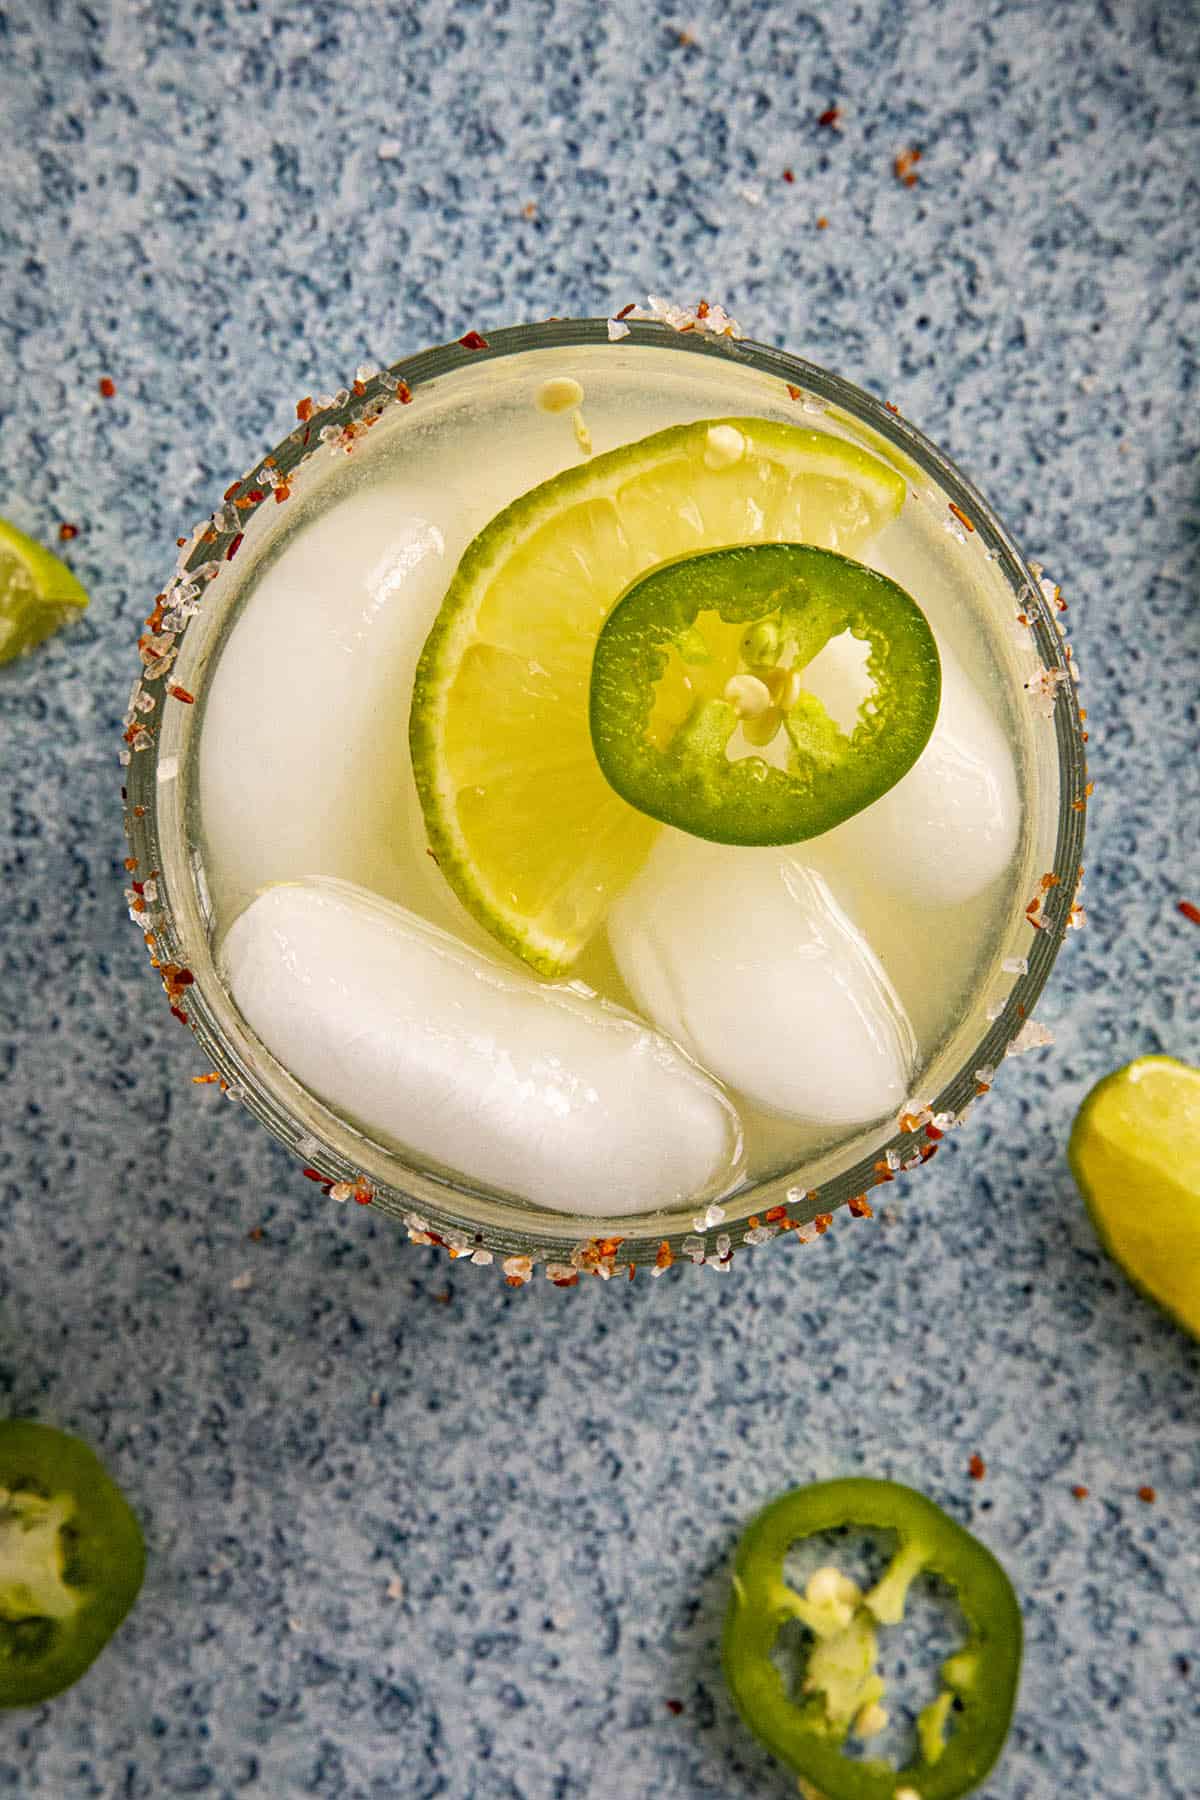 Jalapeno Margarita garnished with a lime wedge and jalapeno slice